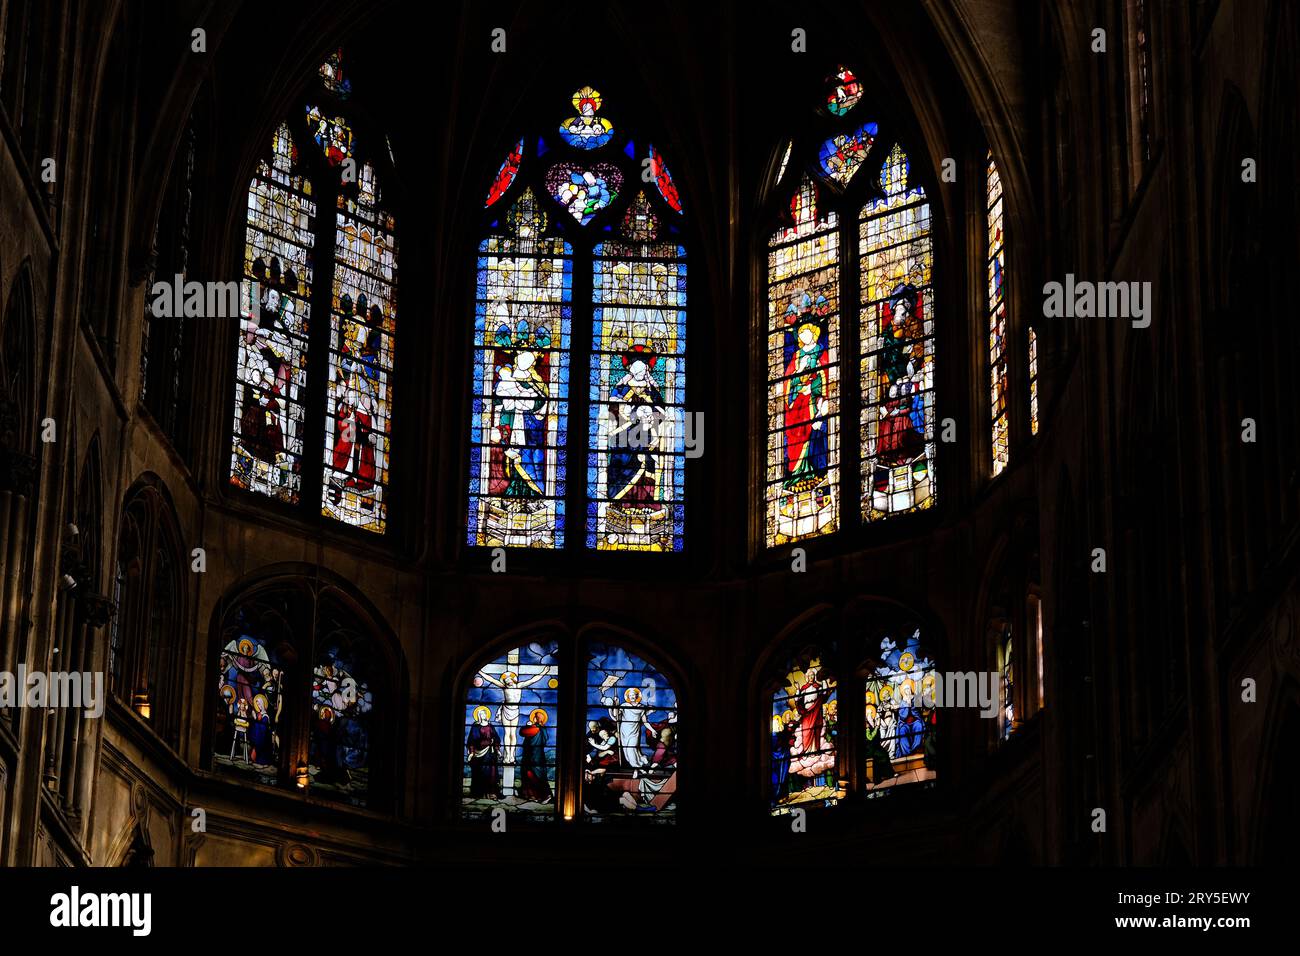 Stained glass windows in Saint Severin church in Paris France Stock Photo